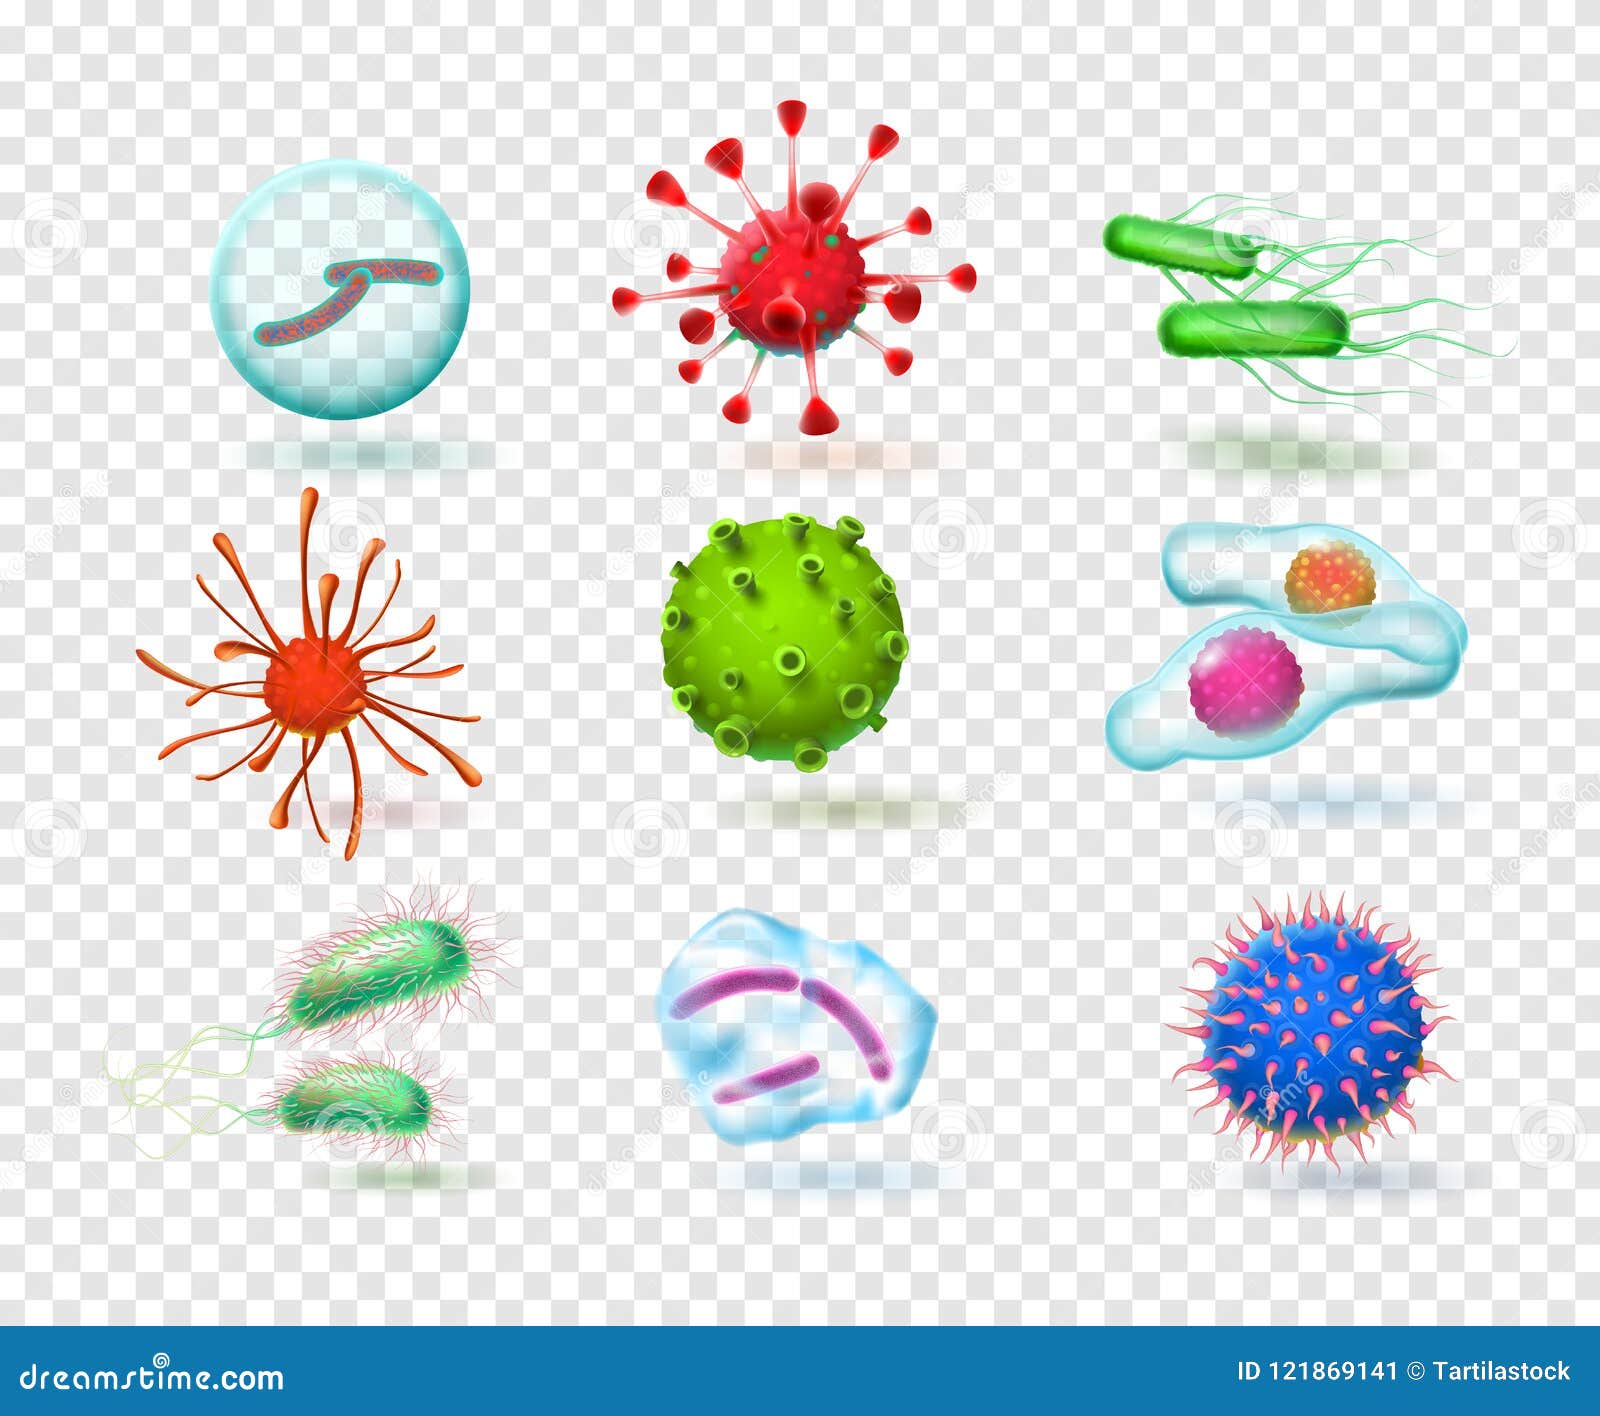 realistic viruses. bacteria germs microorganism. 3d microscopic infection cells.   set